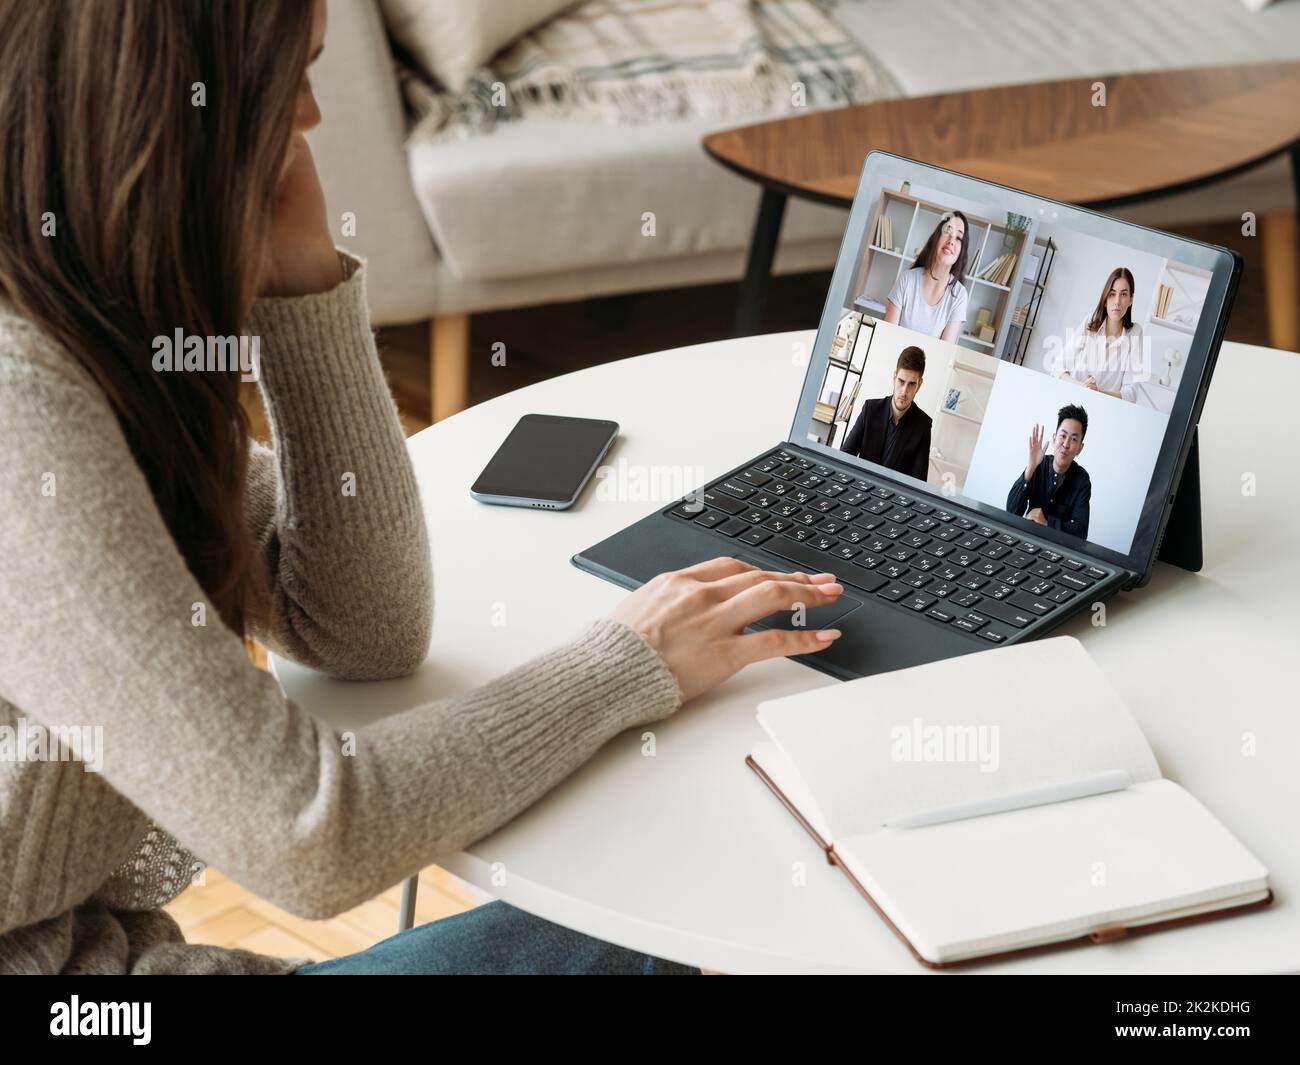 Digital study. Group virtual chat. Online learning. Diverse students working online watching teacher video lesson on laptop screen at home office work Stock Photo